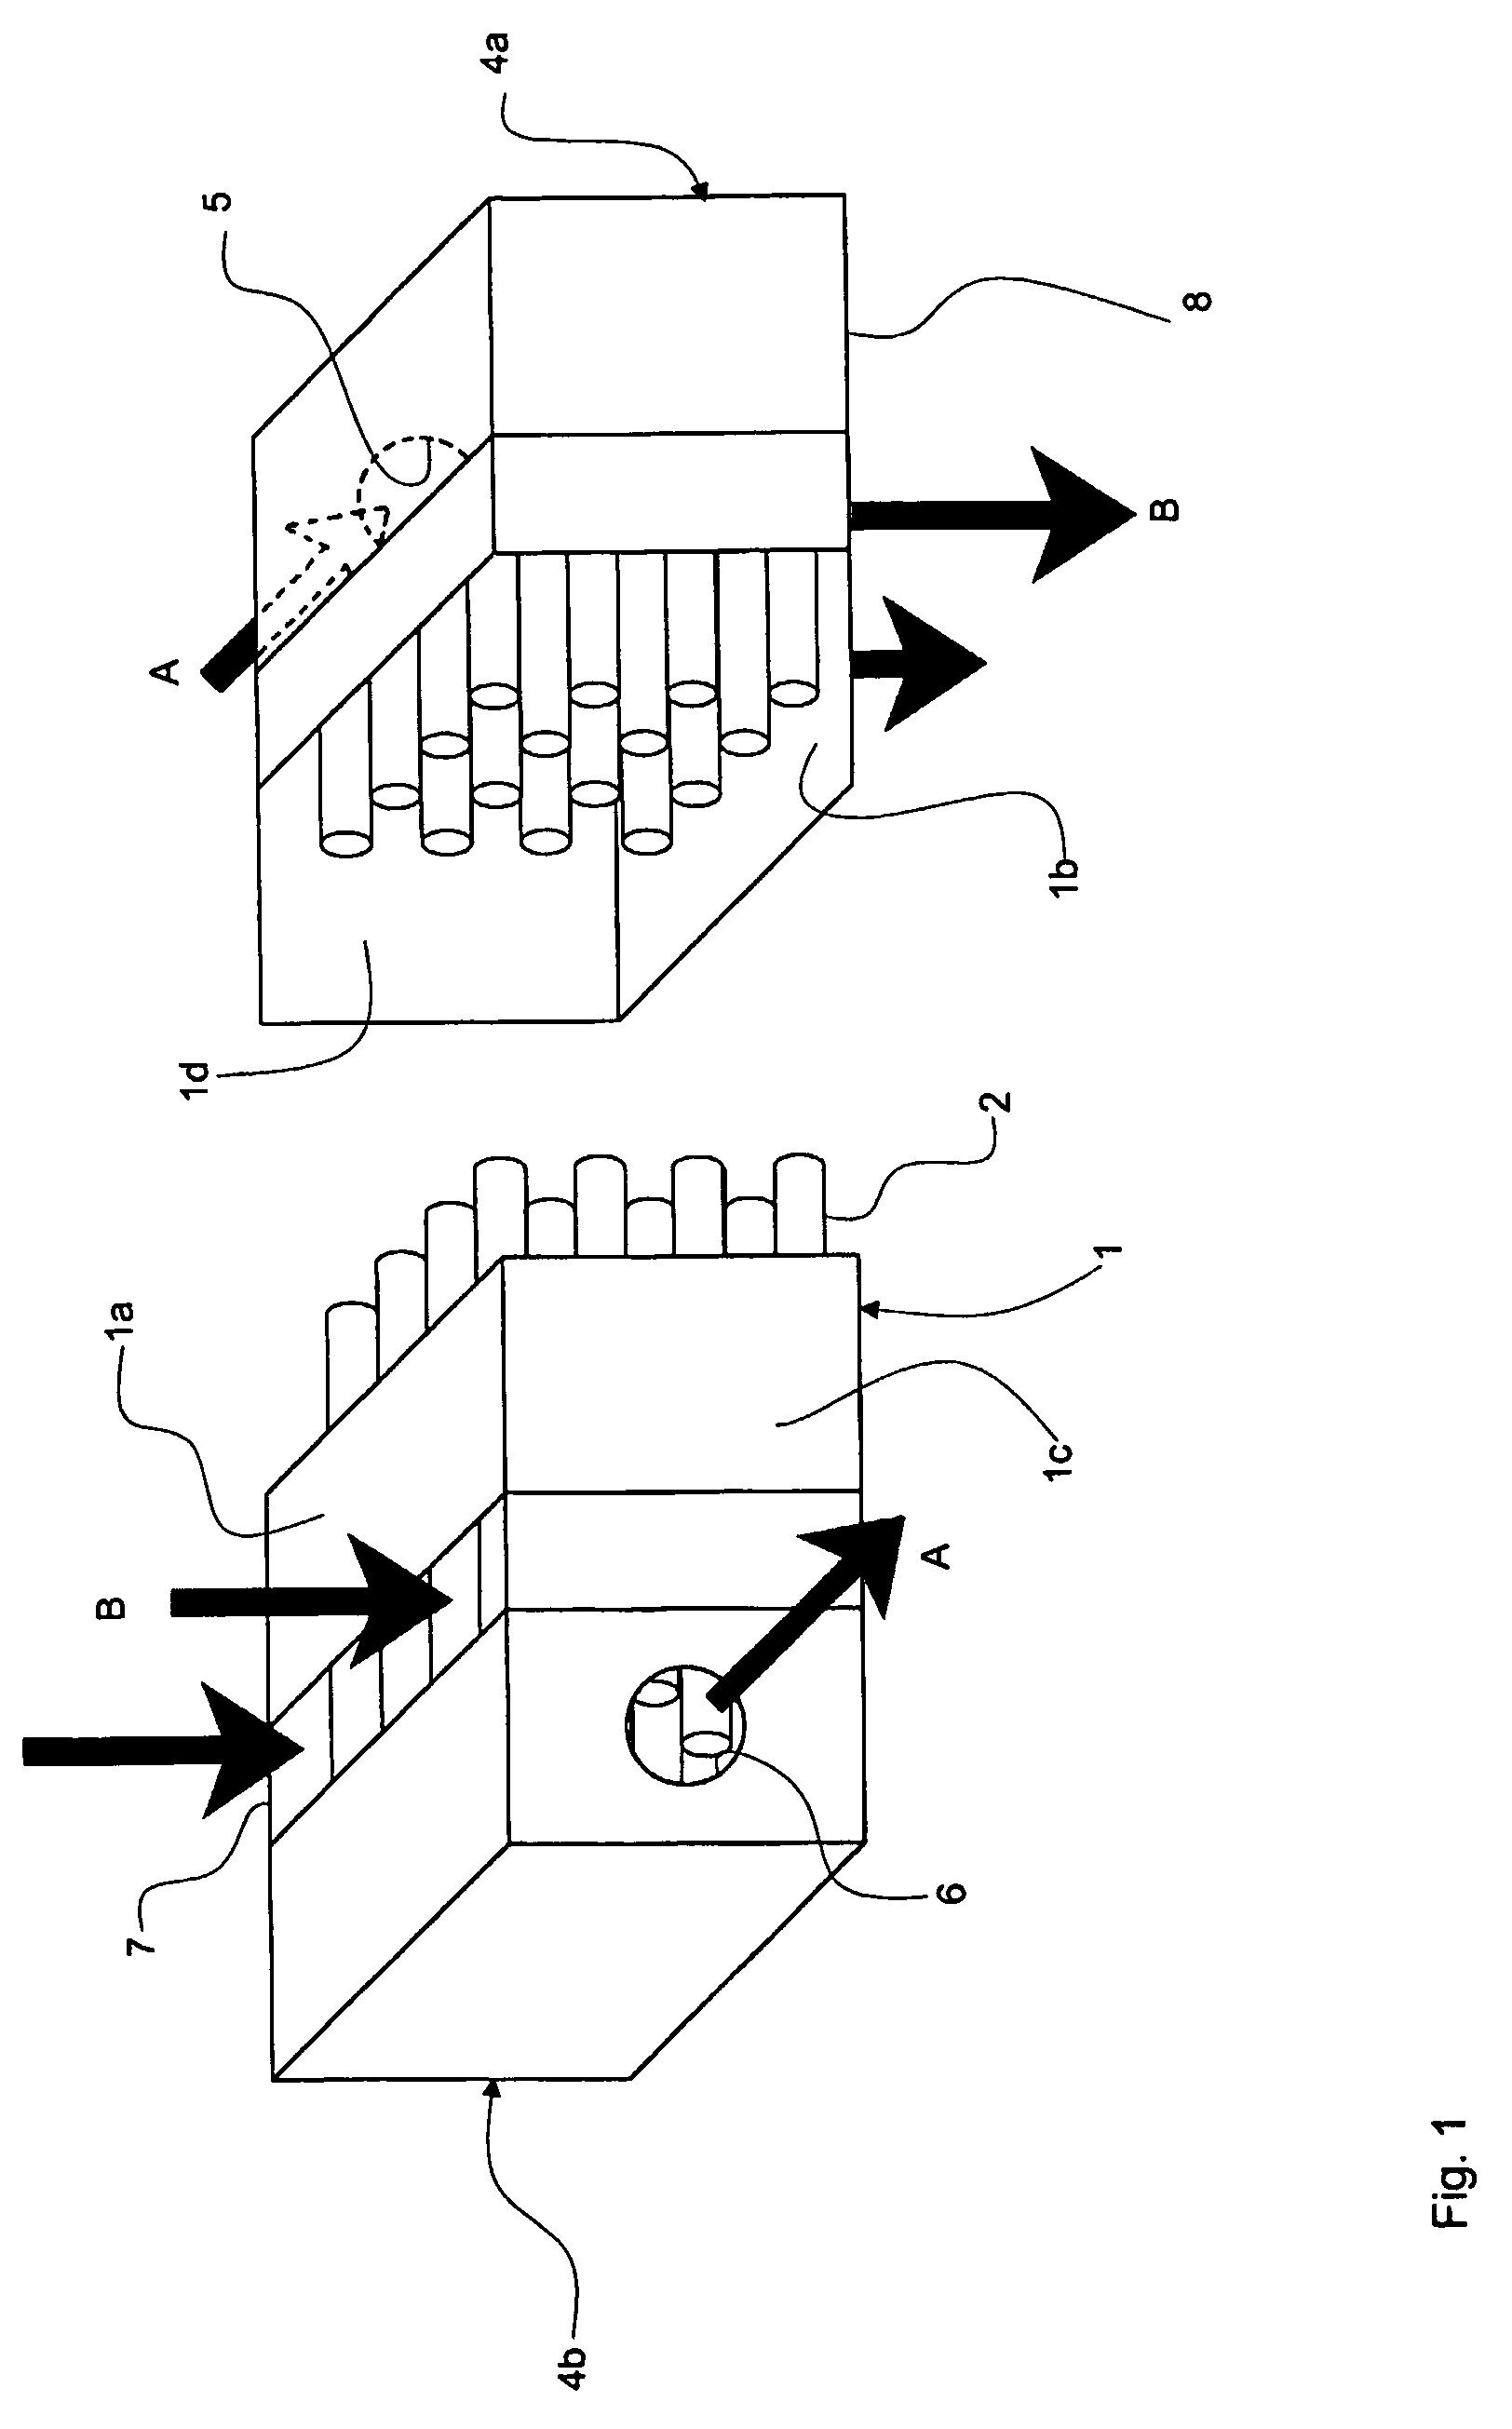 Device for moisture exchange between gas flows